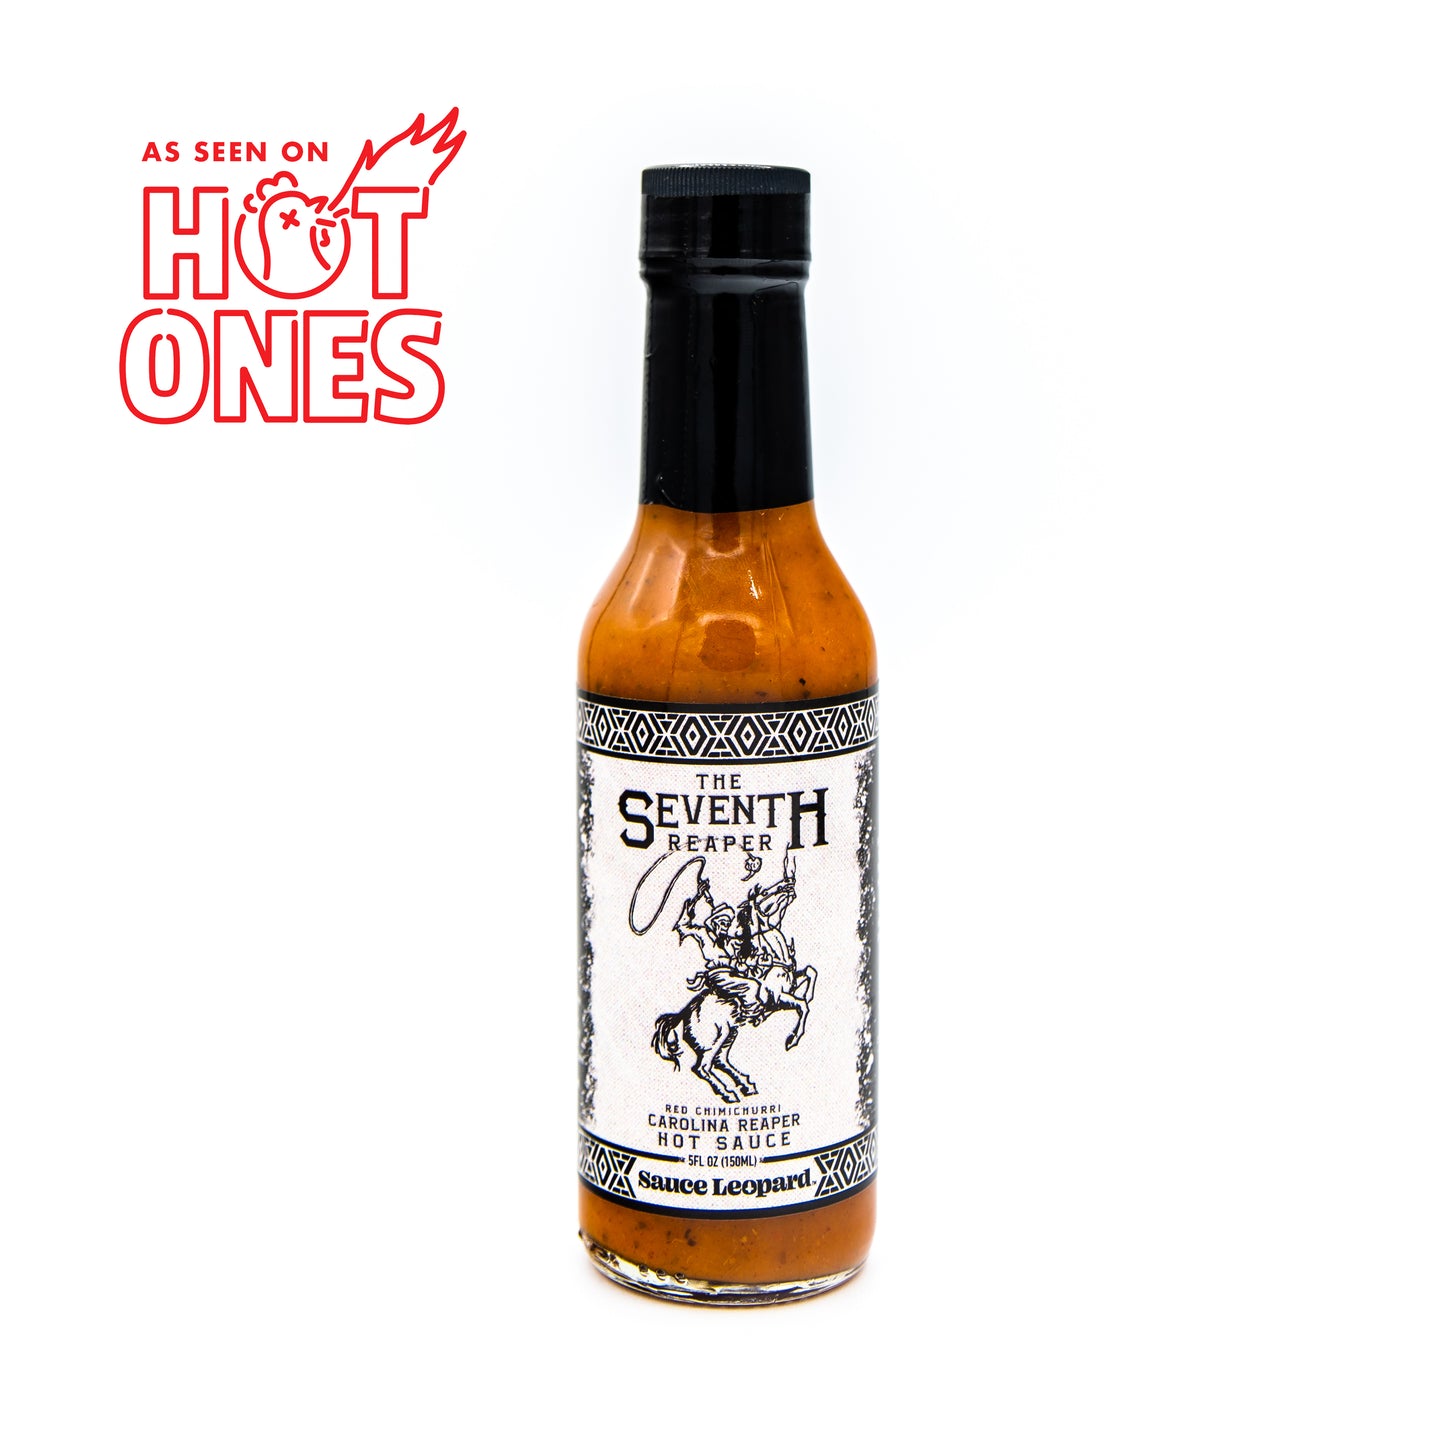 The Seventh Reaper by Sauce Leopard - As seen on Hot Ones Season 18